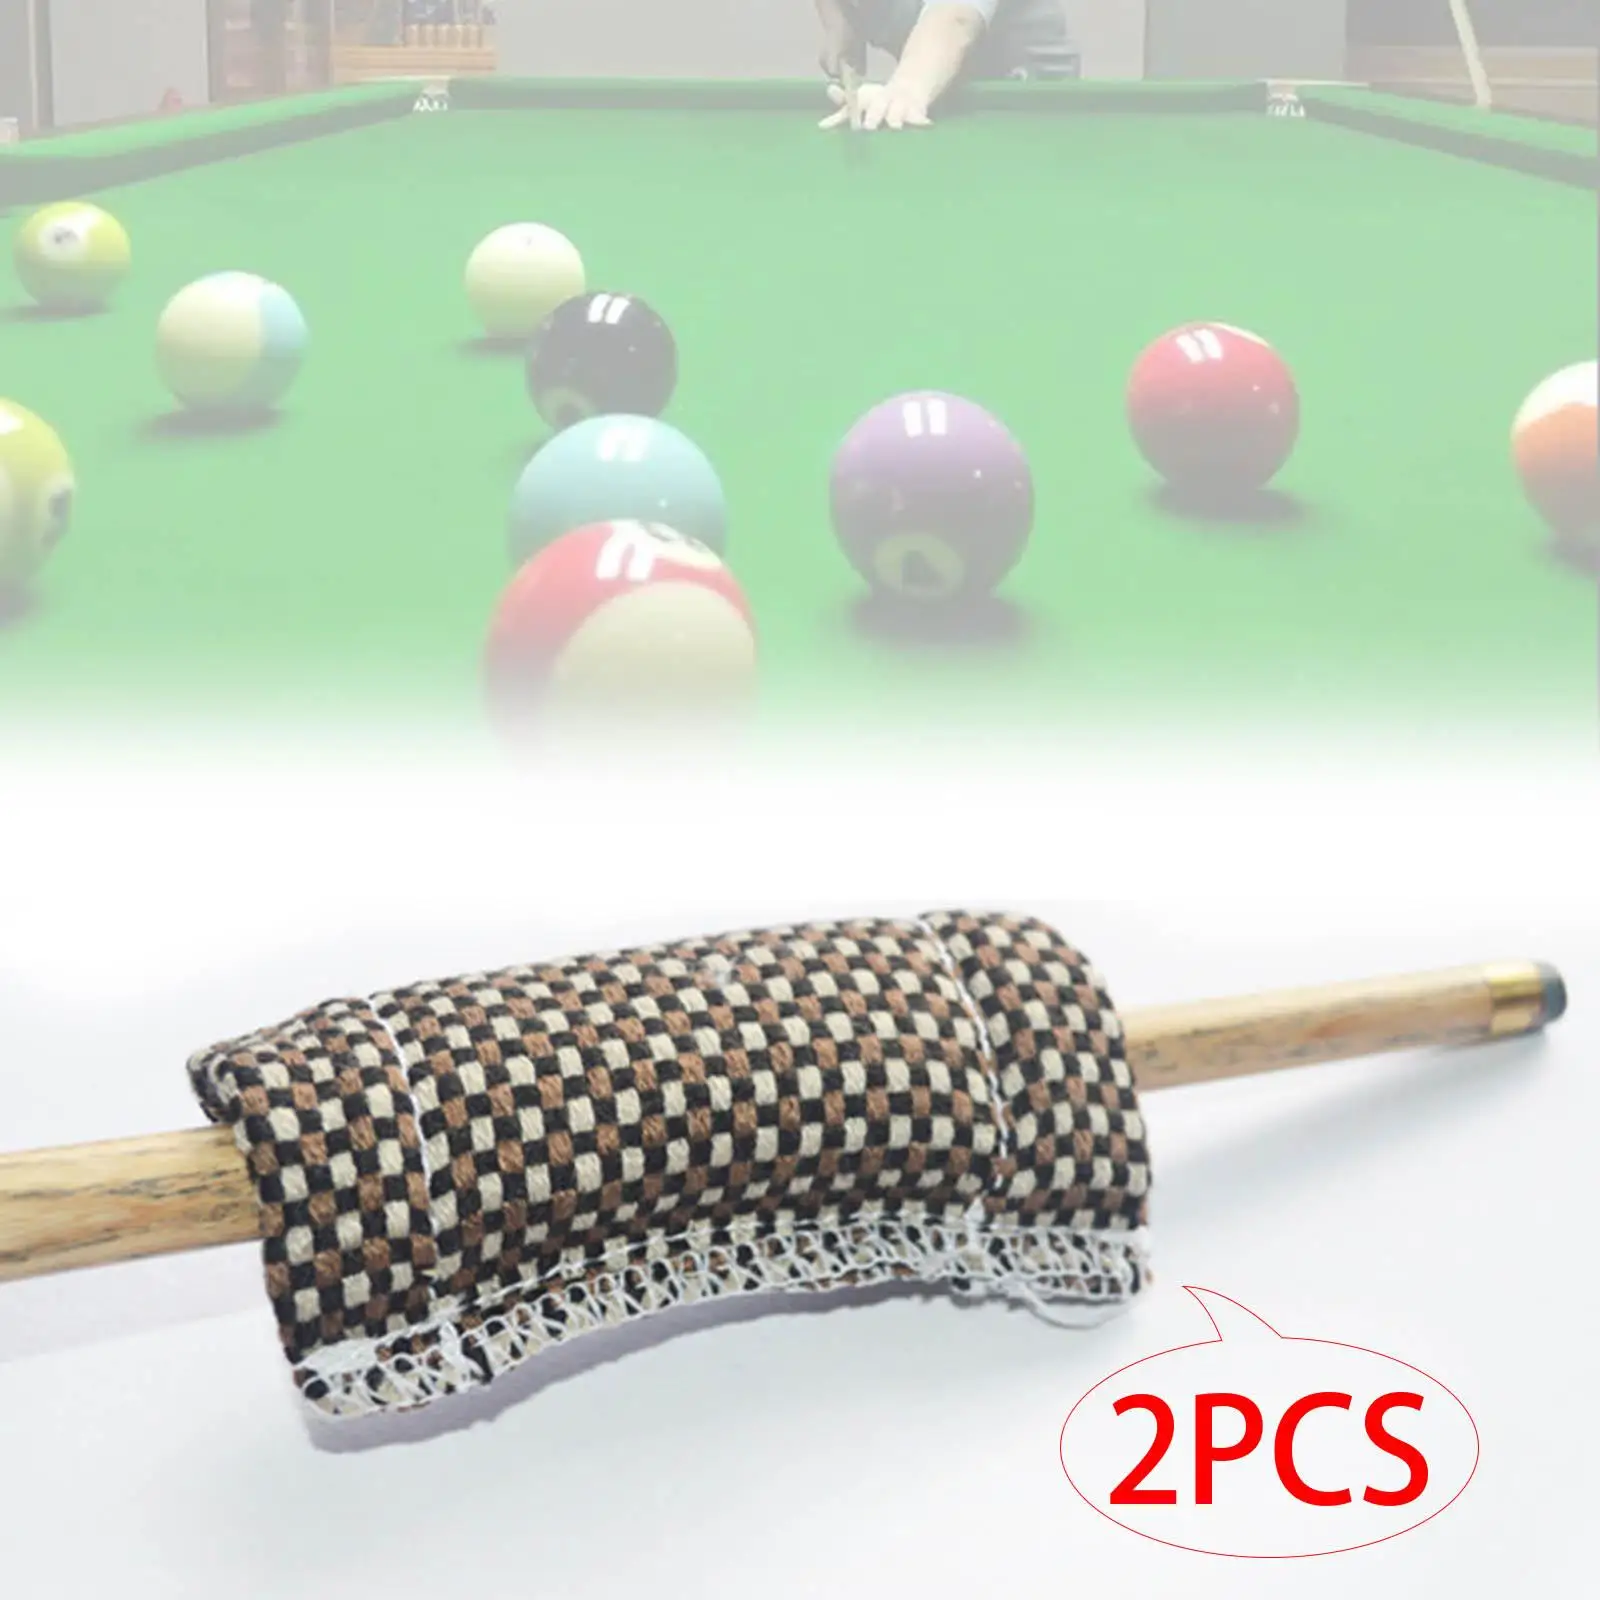 2Pcs Snooker Billiard Pool Cloth Shaft Burnishers Polisher Easy to Carry Cloth Towel Professional Soft Billiards Accessories